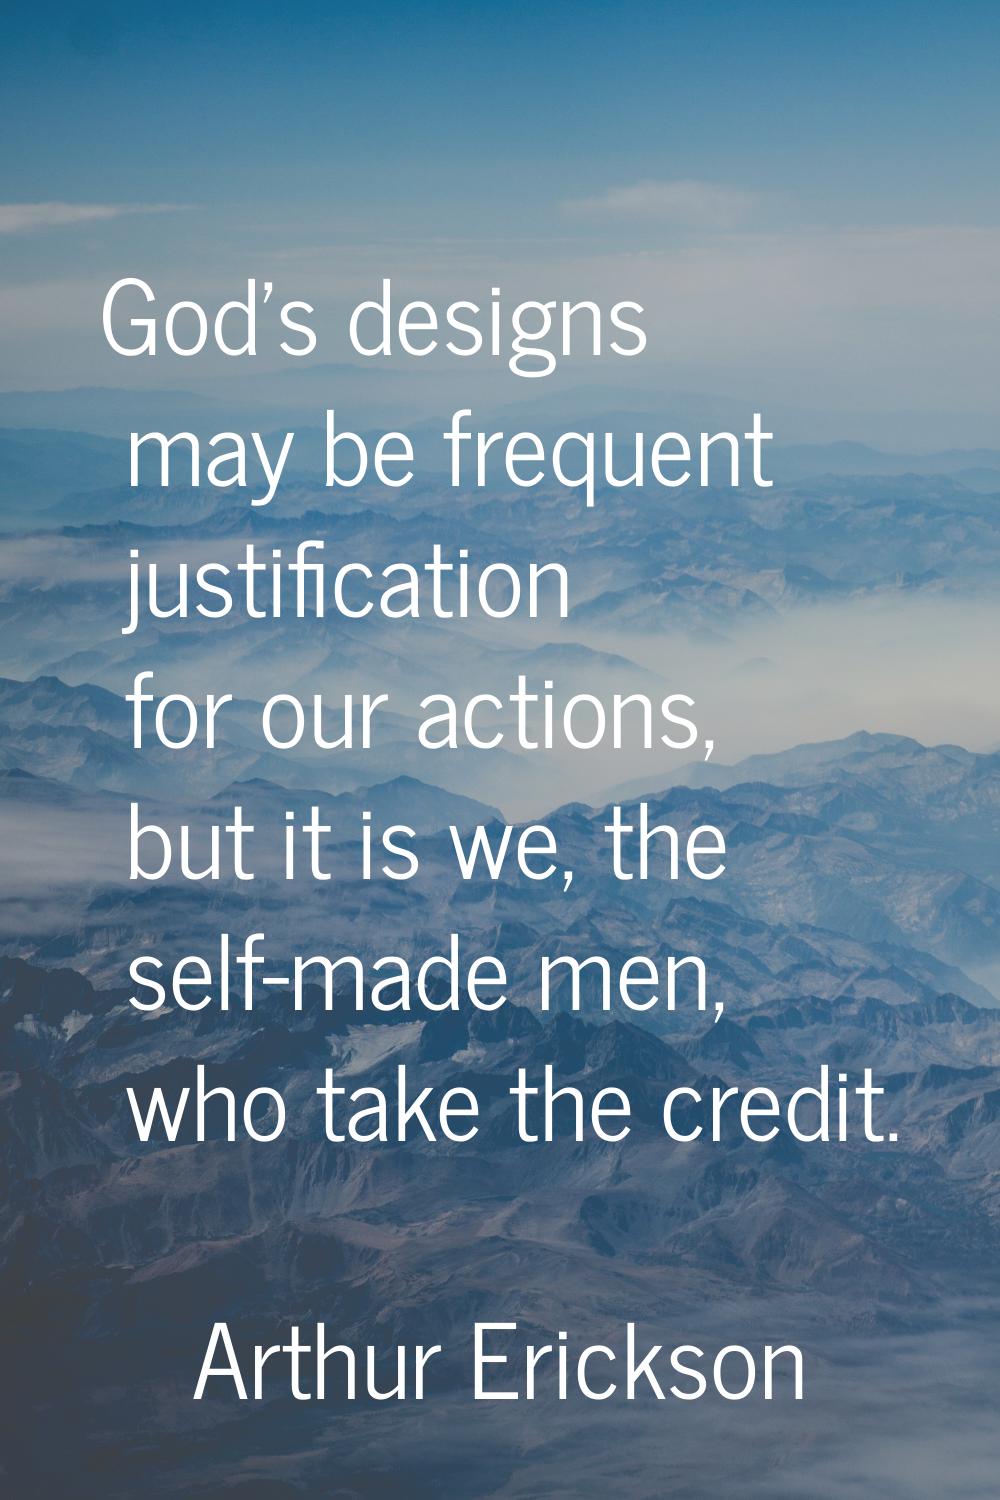 God's designs may be frequent justification for our actions, but it is we, the self-made men, who t